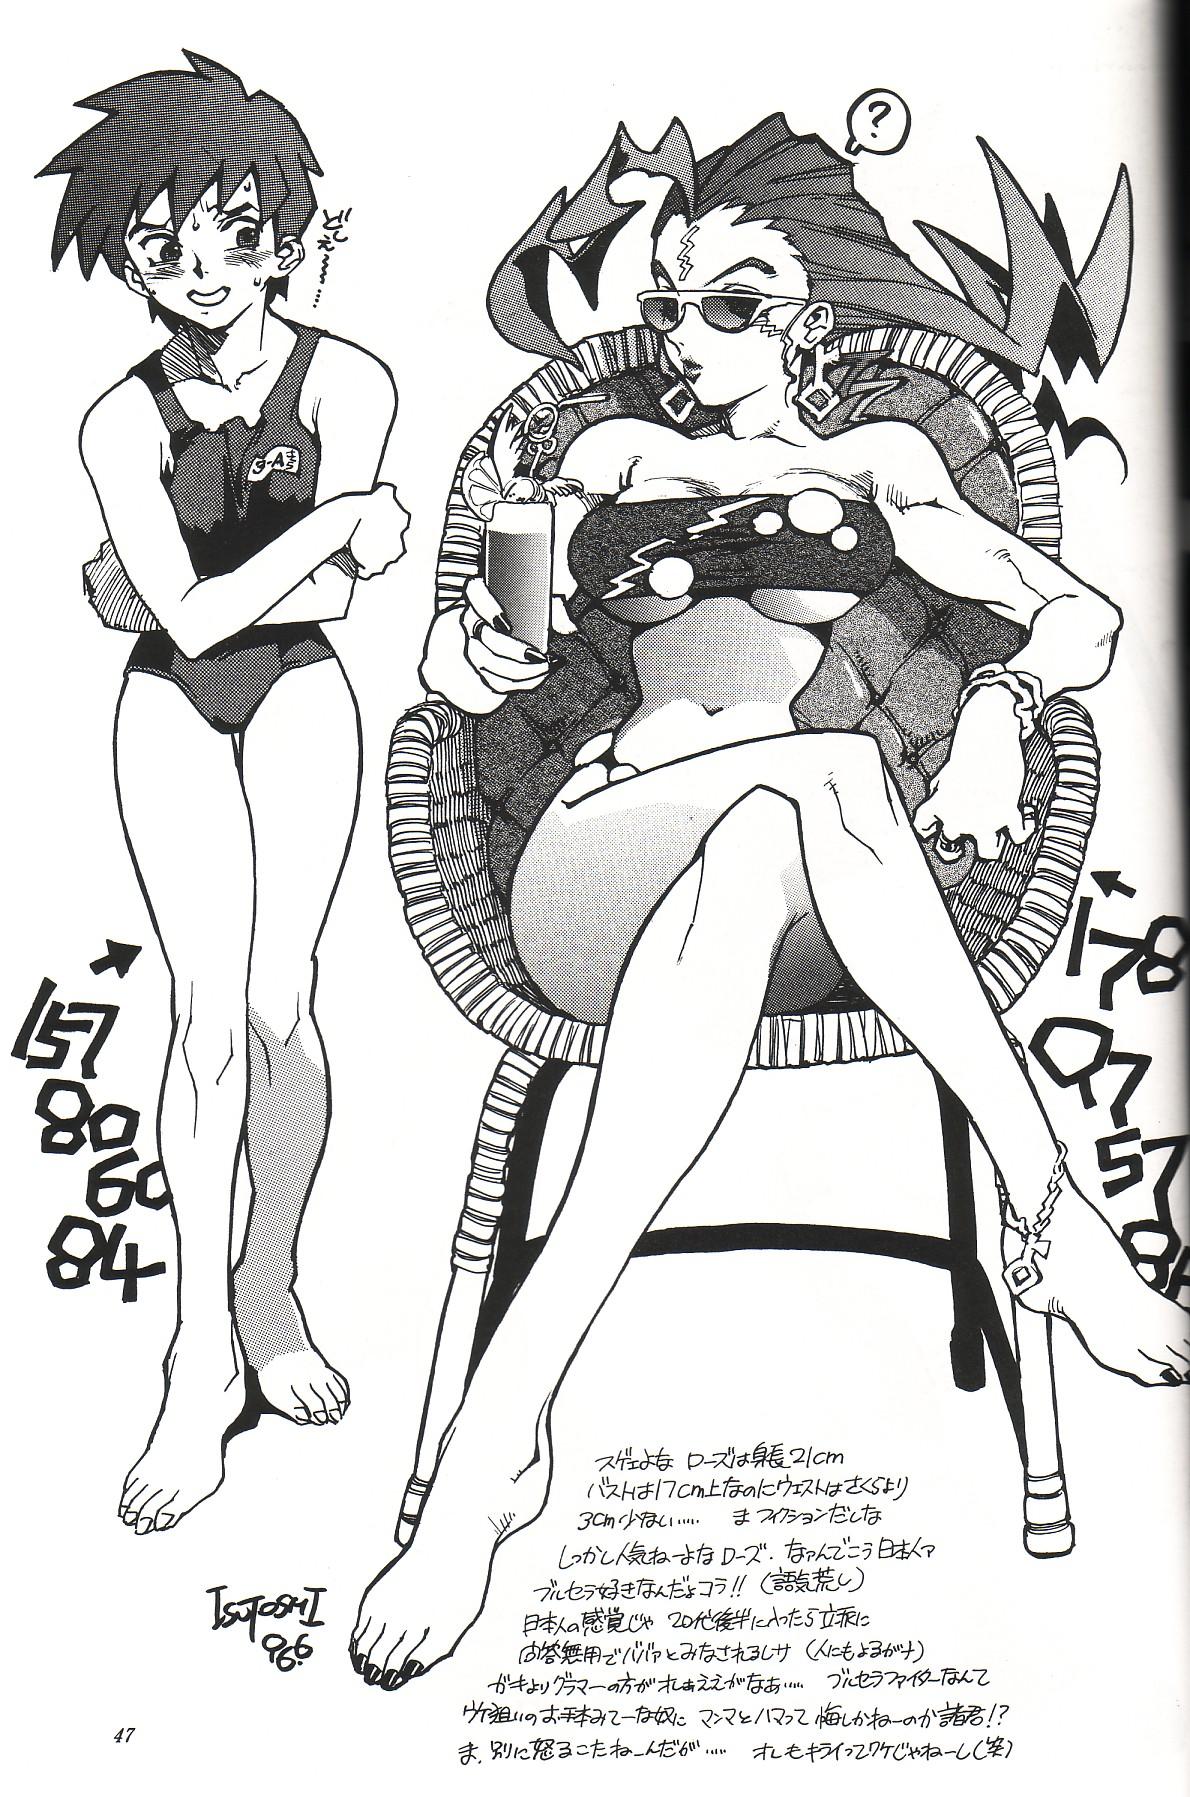 Perfect Tits SNK Monogatari - King of fighters Plumper - Page 9